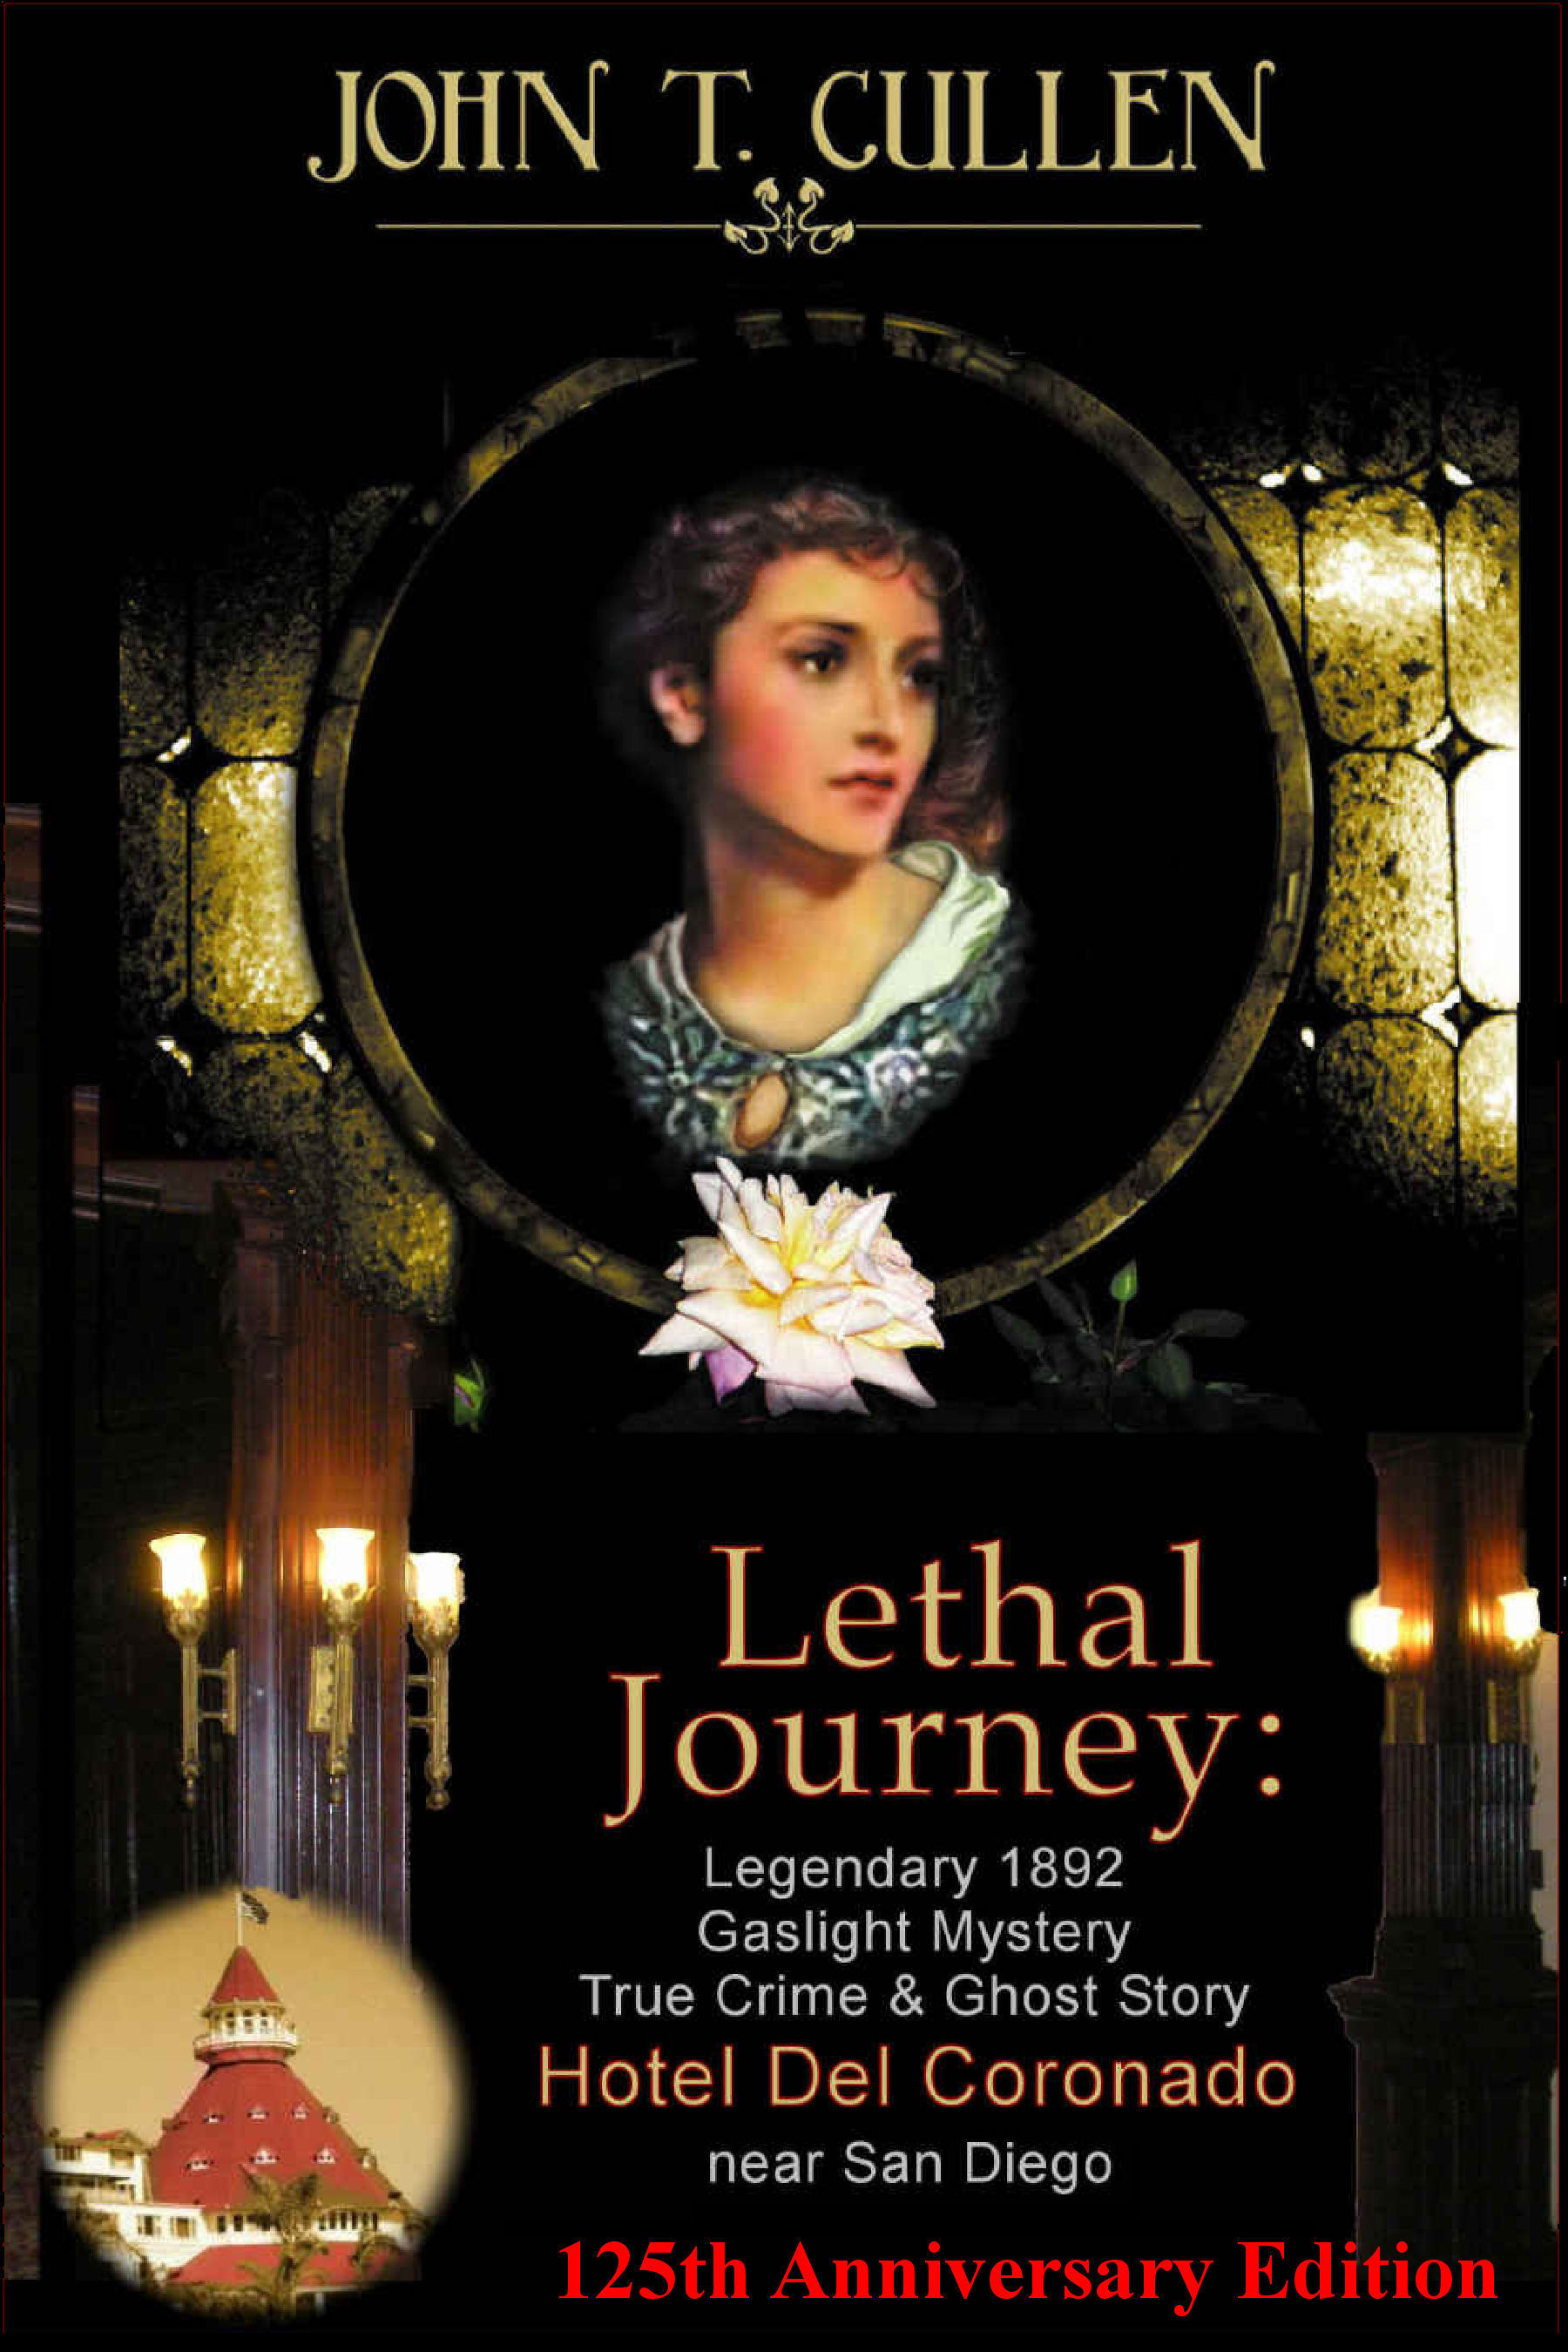 Click to see all three books - Lethal Journey - fiction - a dramatization based on Dead Move by John T. Cullen, and the best of the legend.